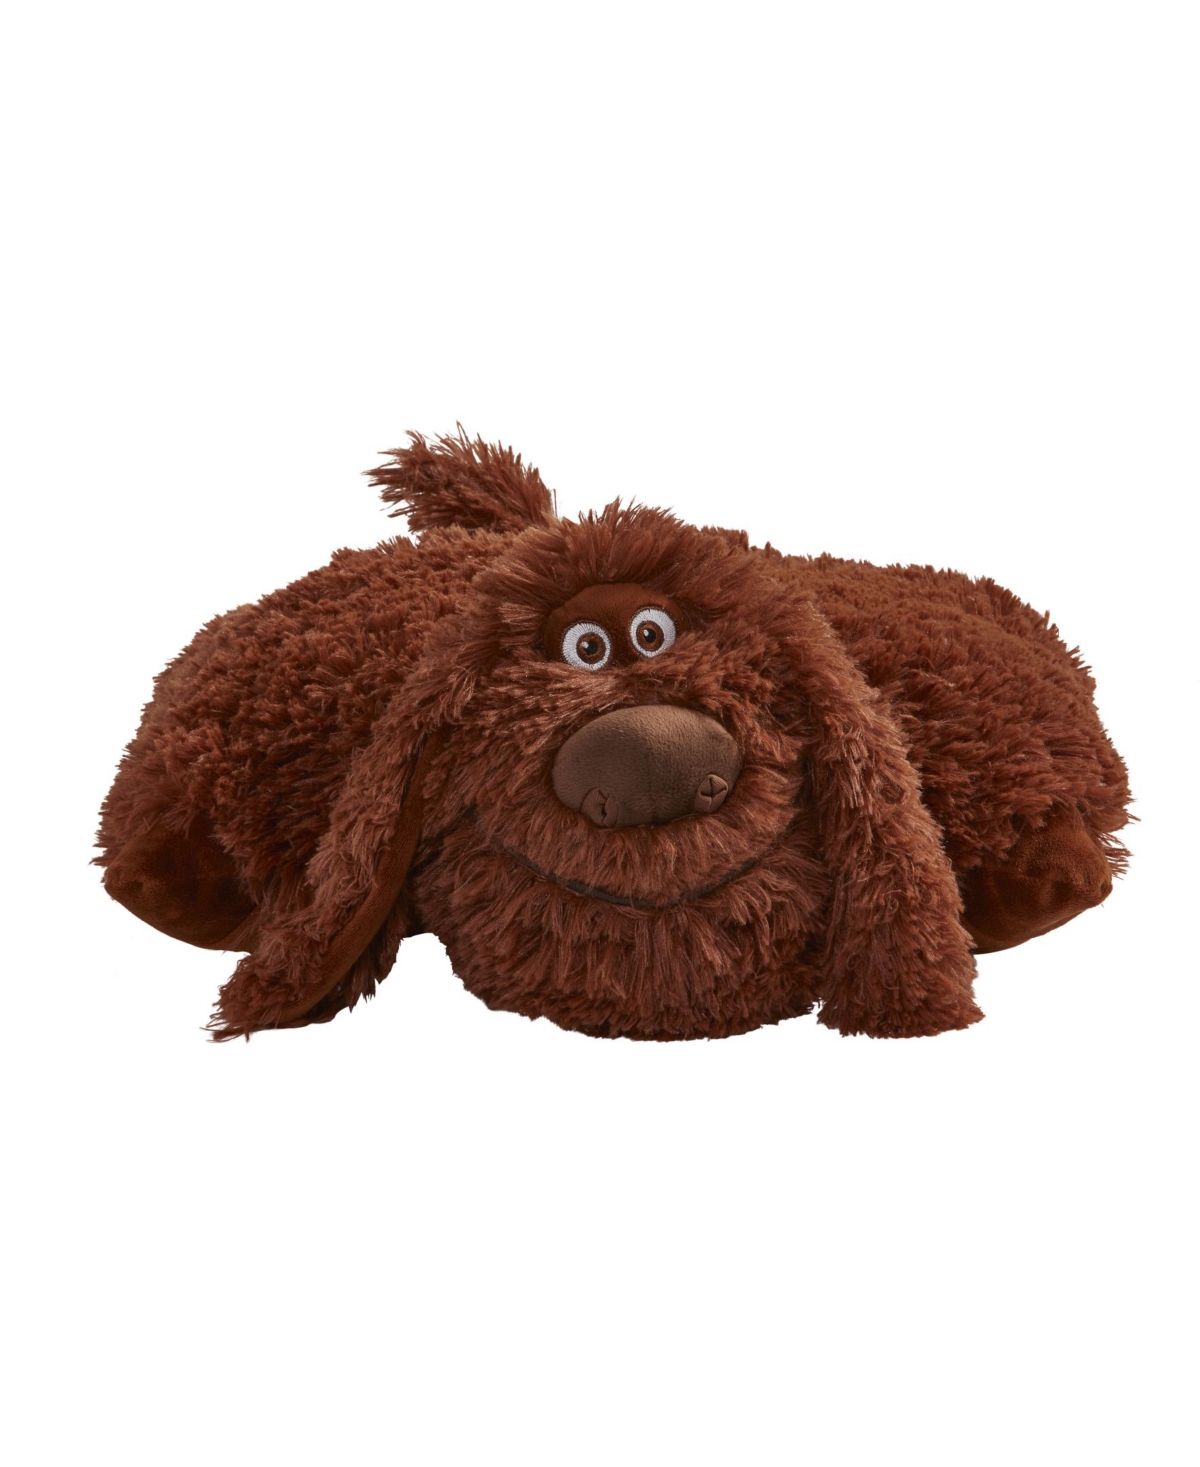 Shop Pillow Pets Nbcuniversal The Secret Life Of Pets Duke Stuffed Animal Plush Toy In Brown